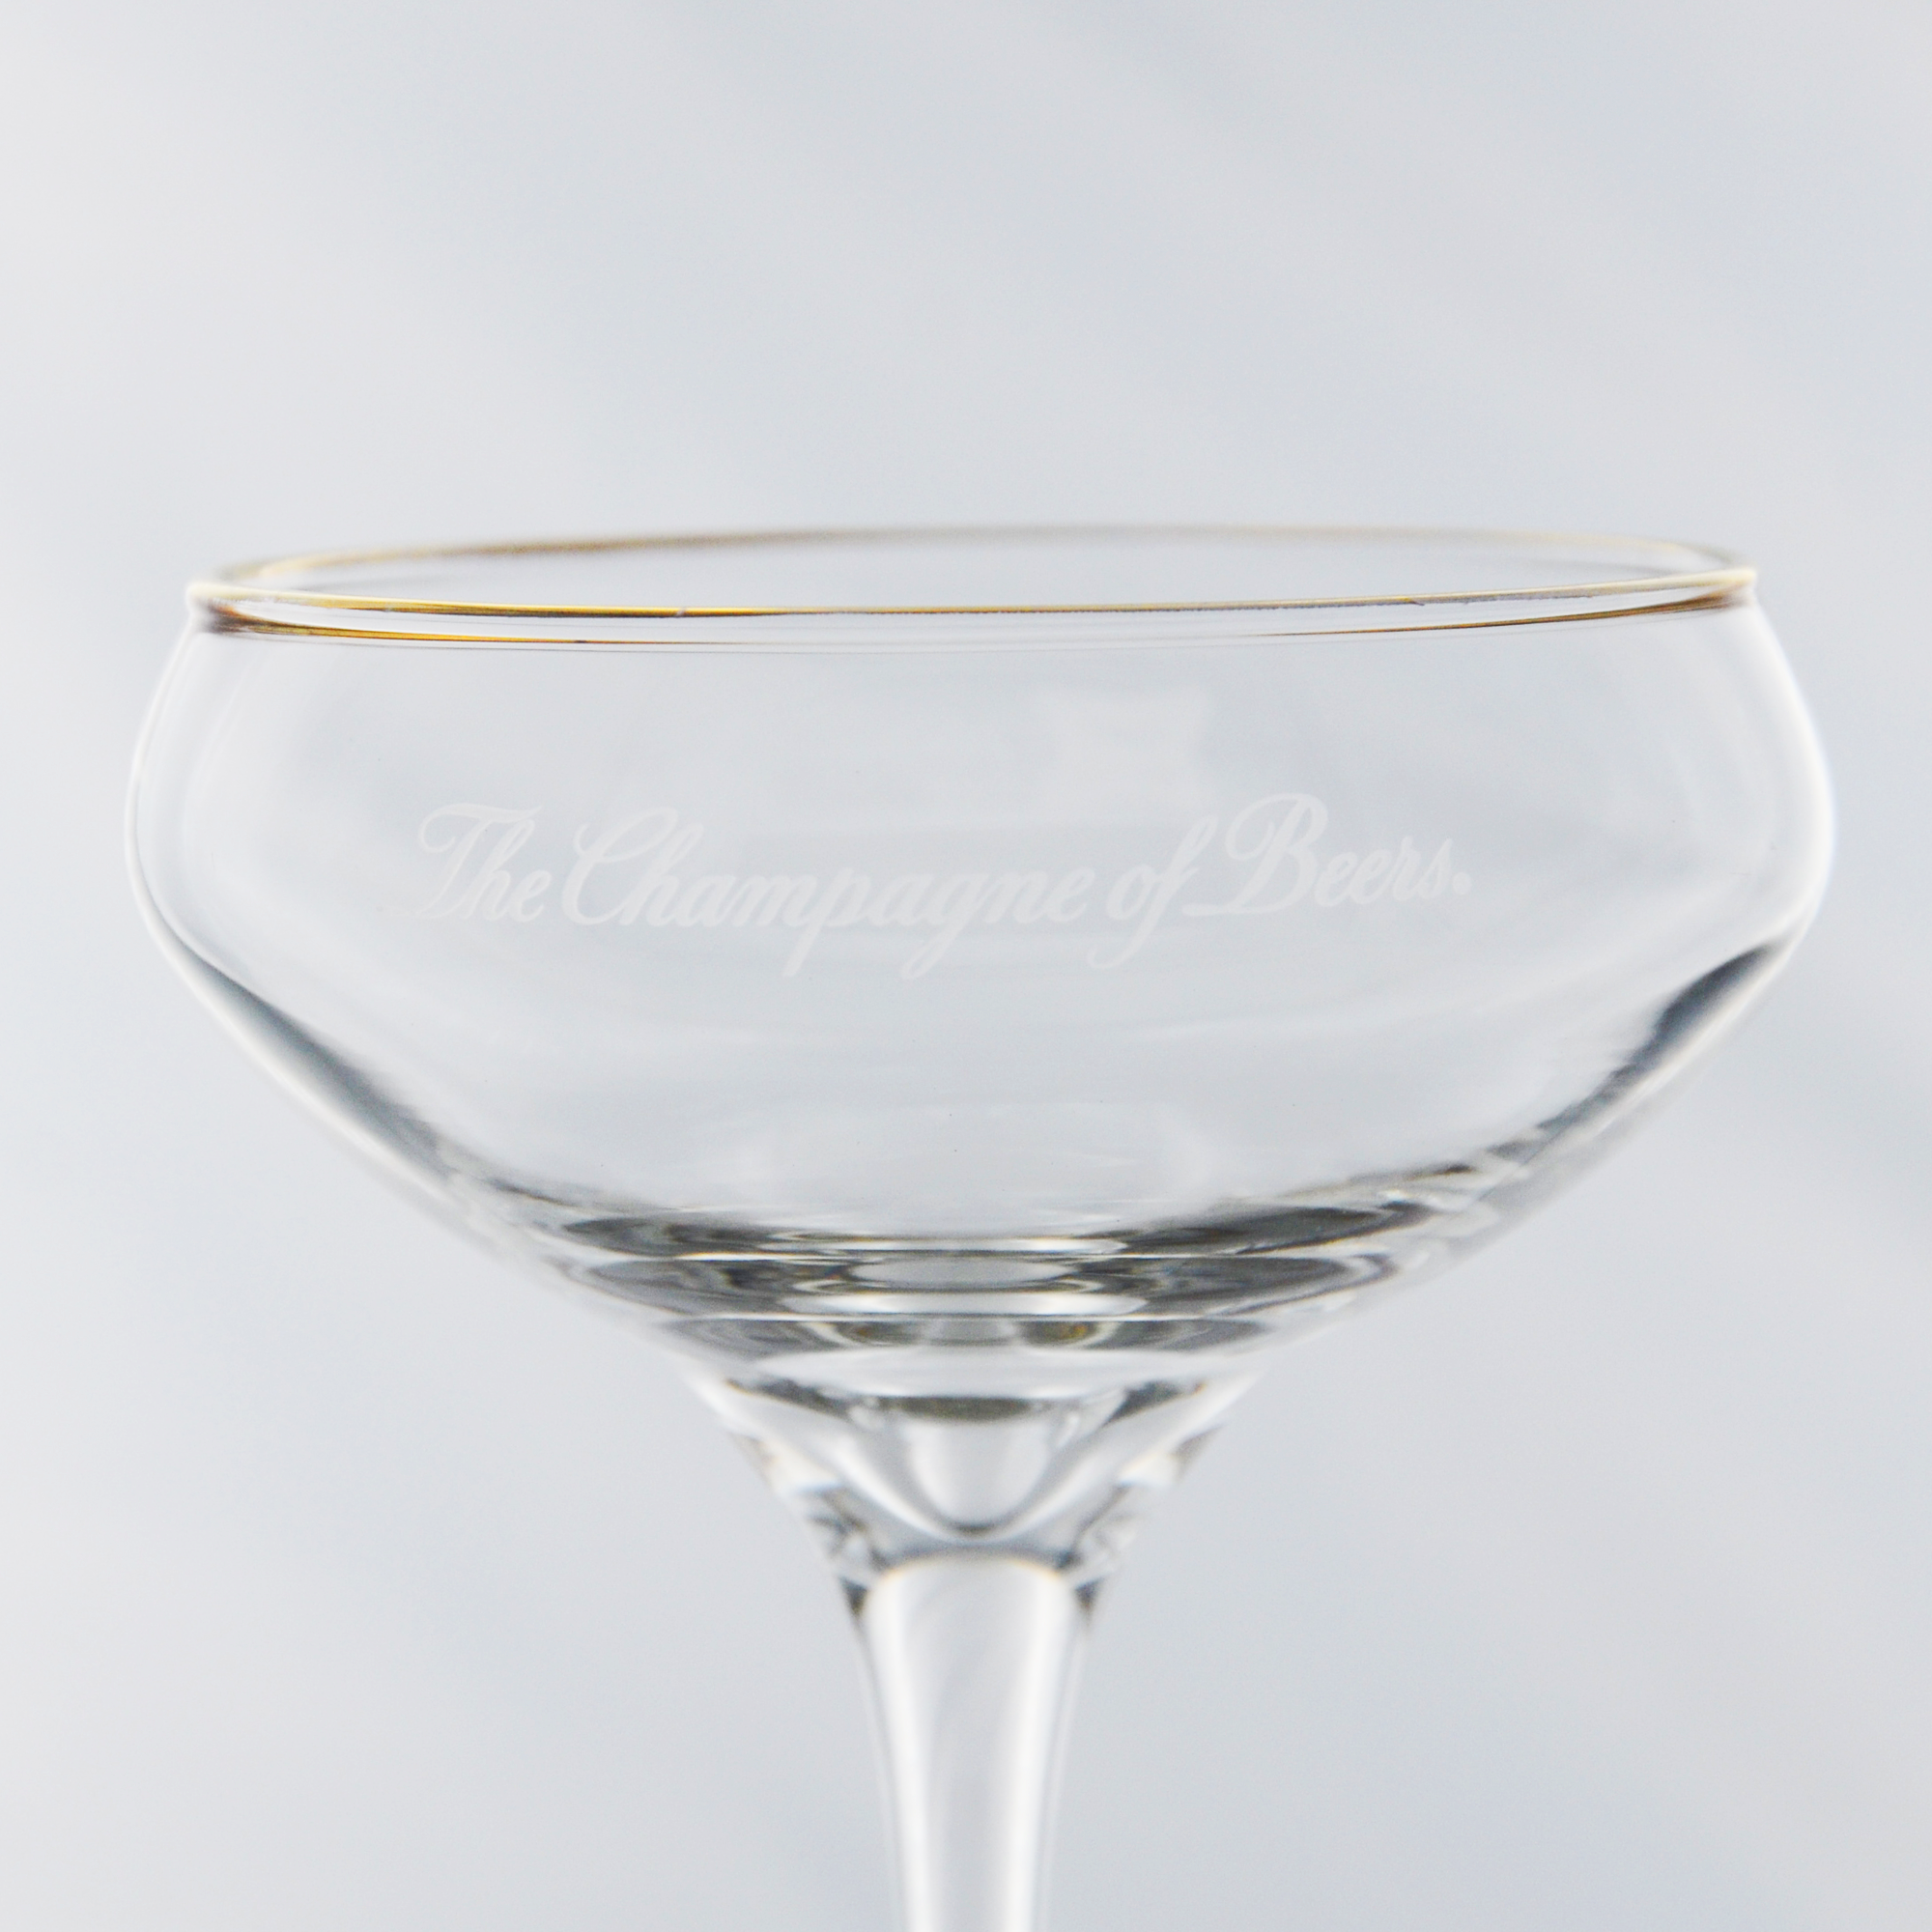 HIGH LIFE 120TH COUPE GLASS